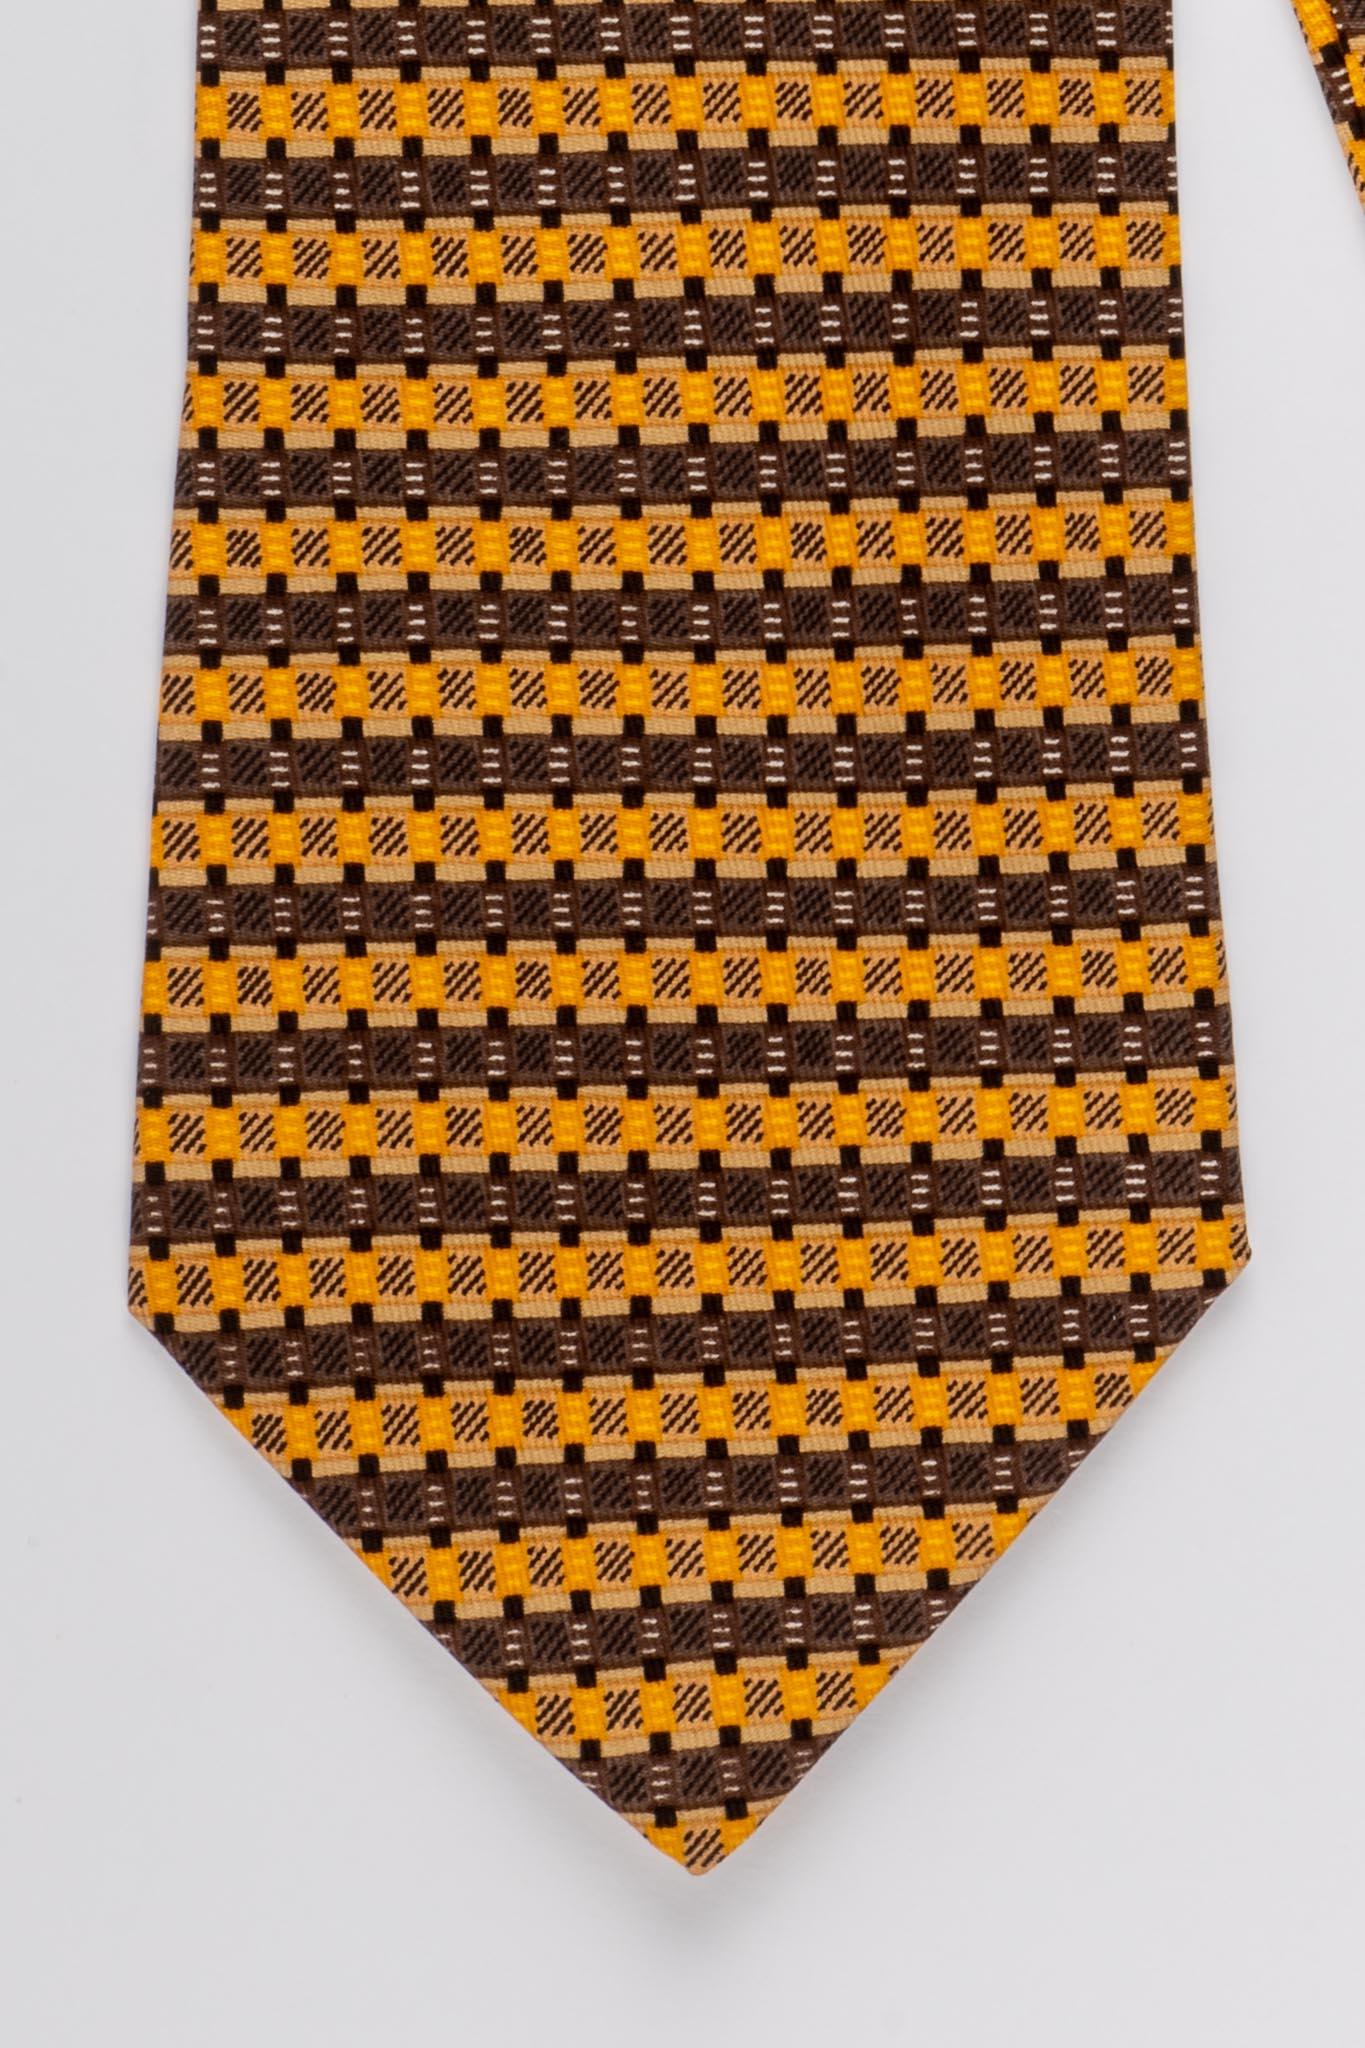 Hermes yellow and etoupe silk geometric tie. Excellent condition.